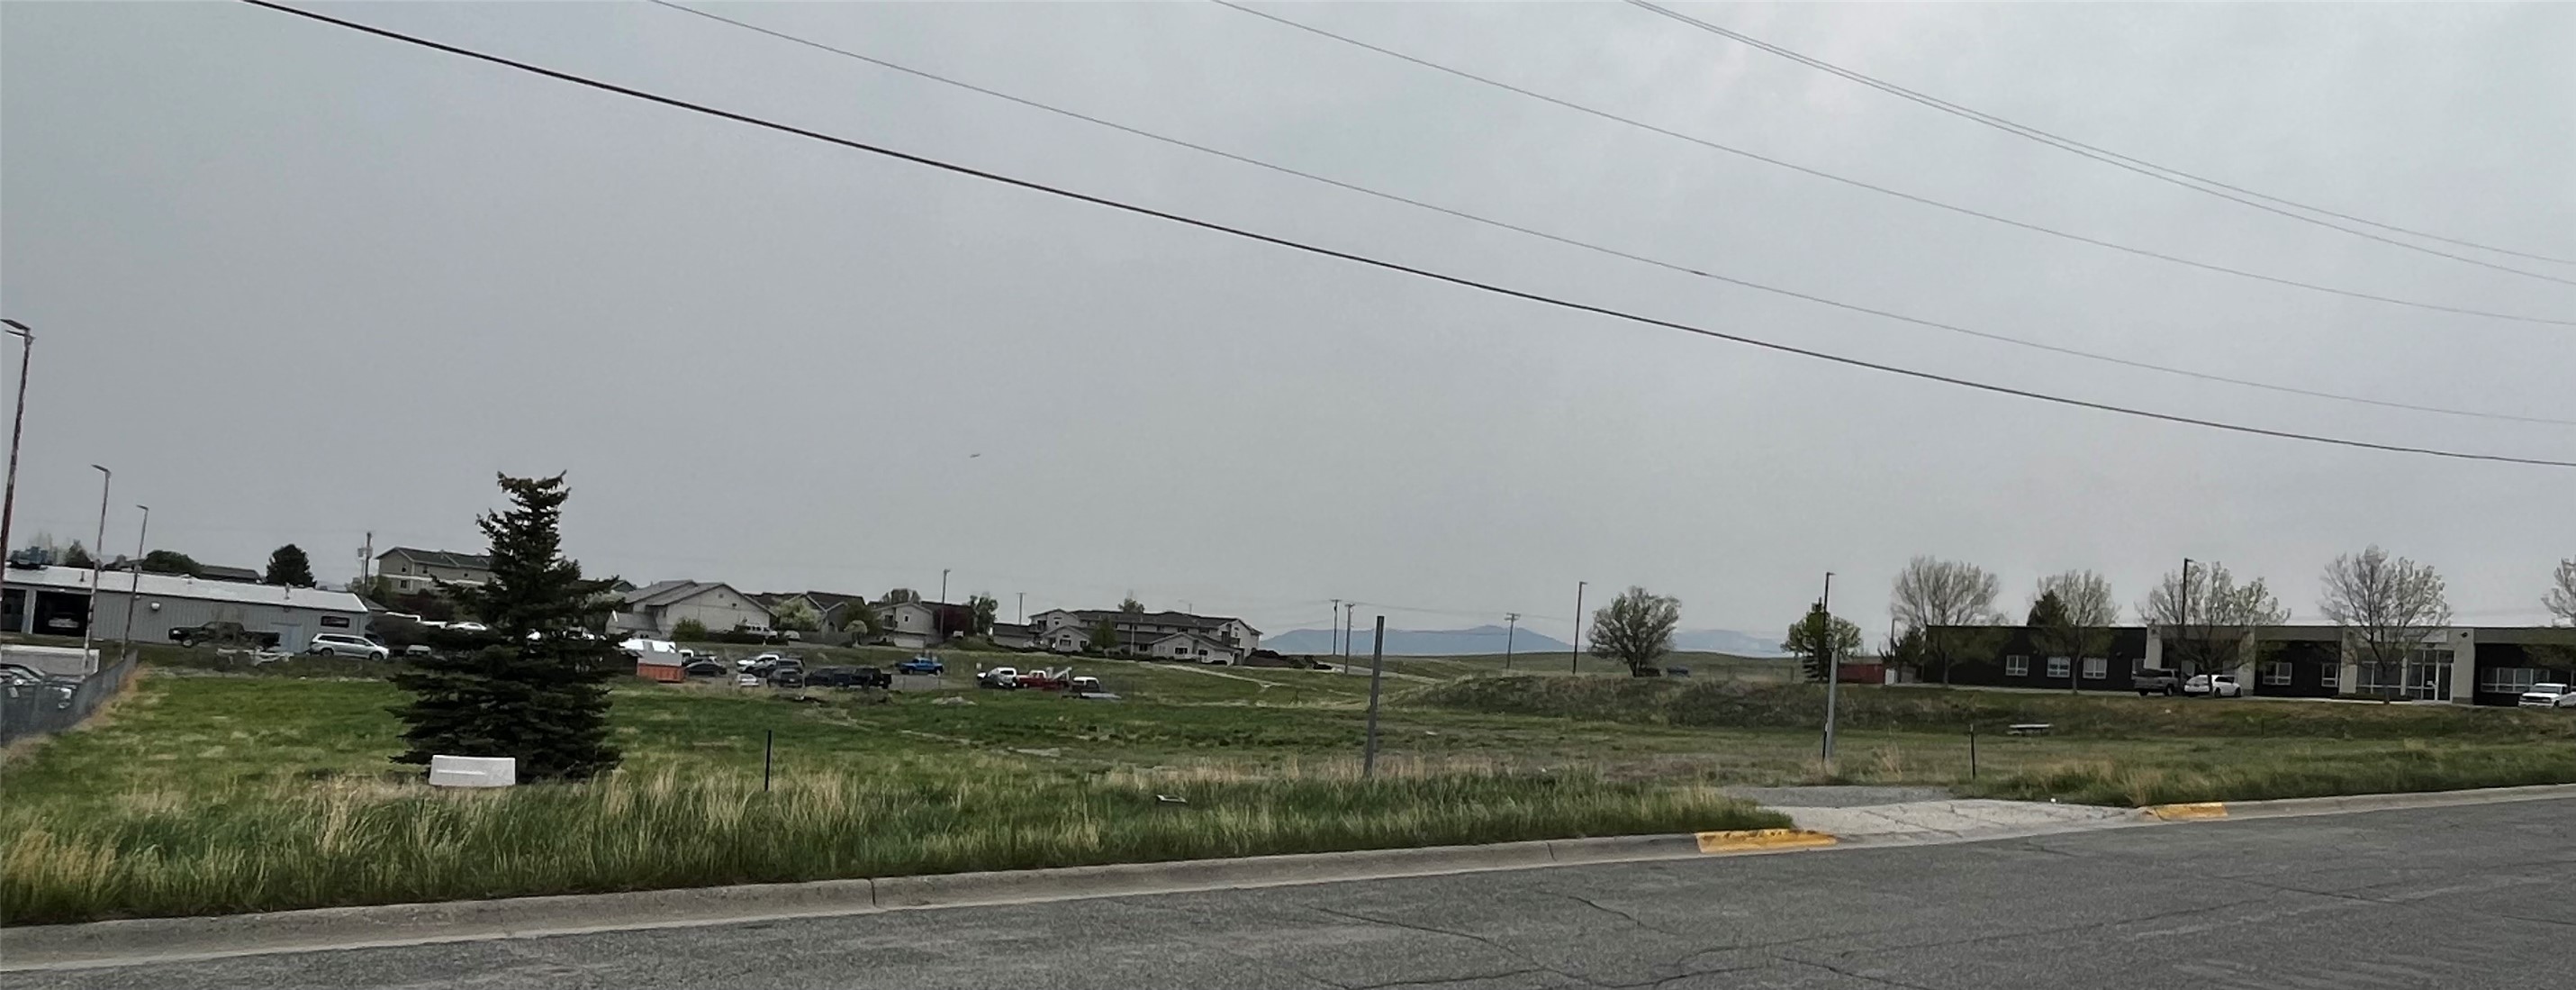 Commercial lot in the City of Helena. Flat and easily buildable. Great lot for office, industrial, or warehouse. All City services available.

Listing Agent has a financial interest in the property.